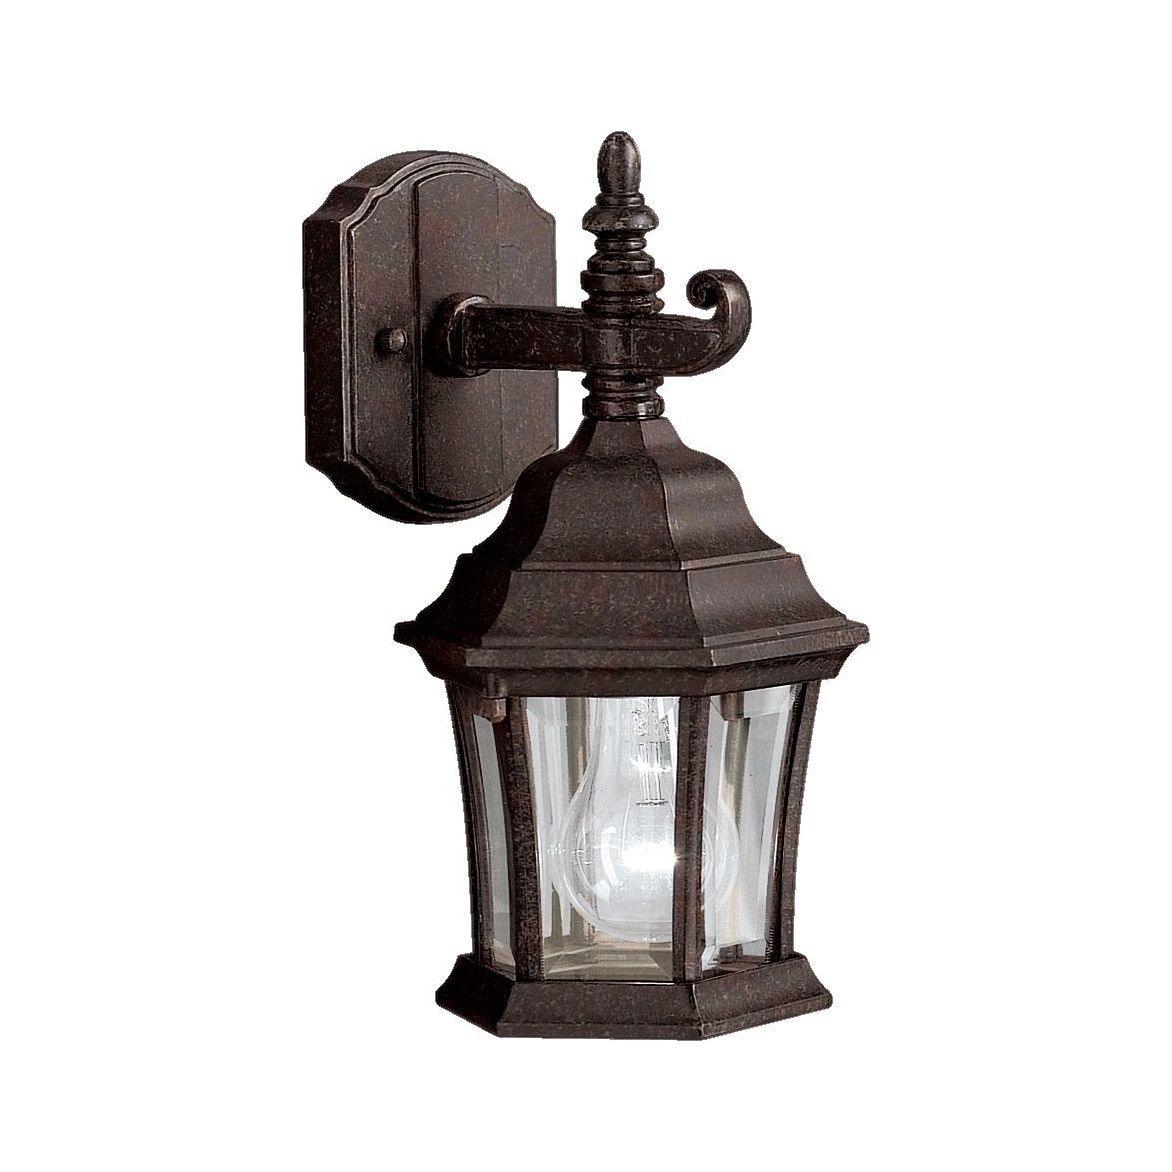 Kichler - Townhouse Outdoor Wall Light - Lights Canada